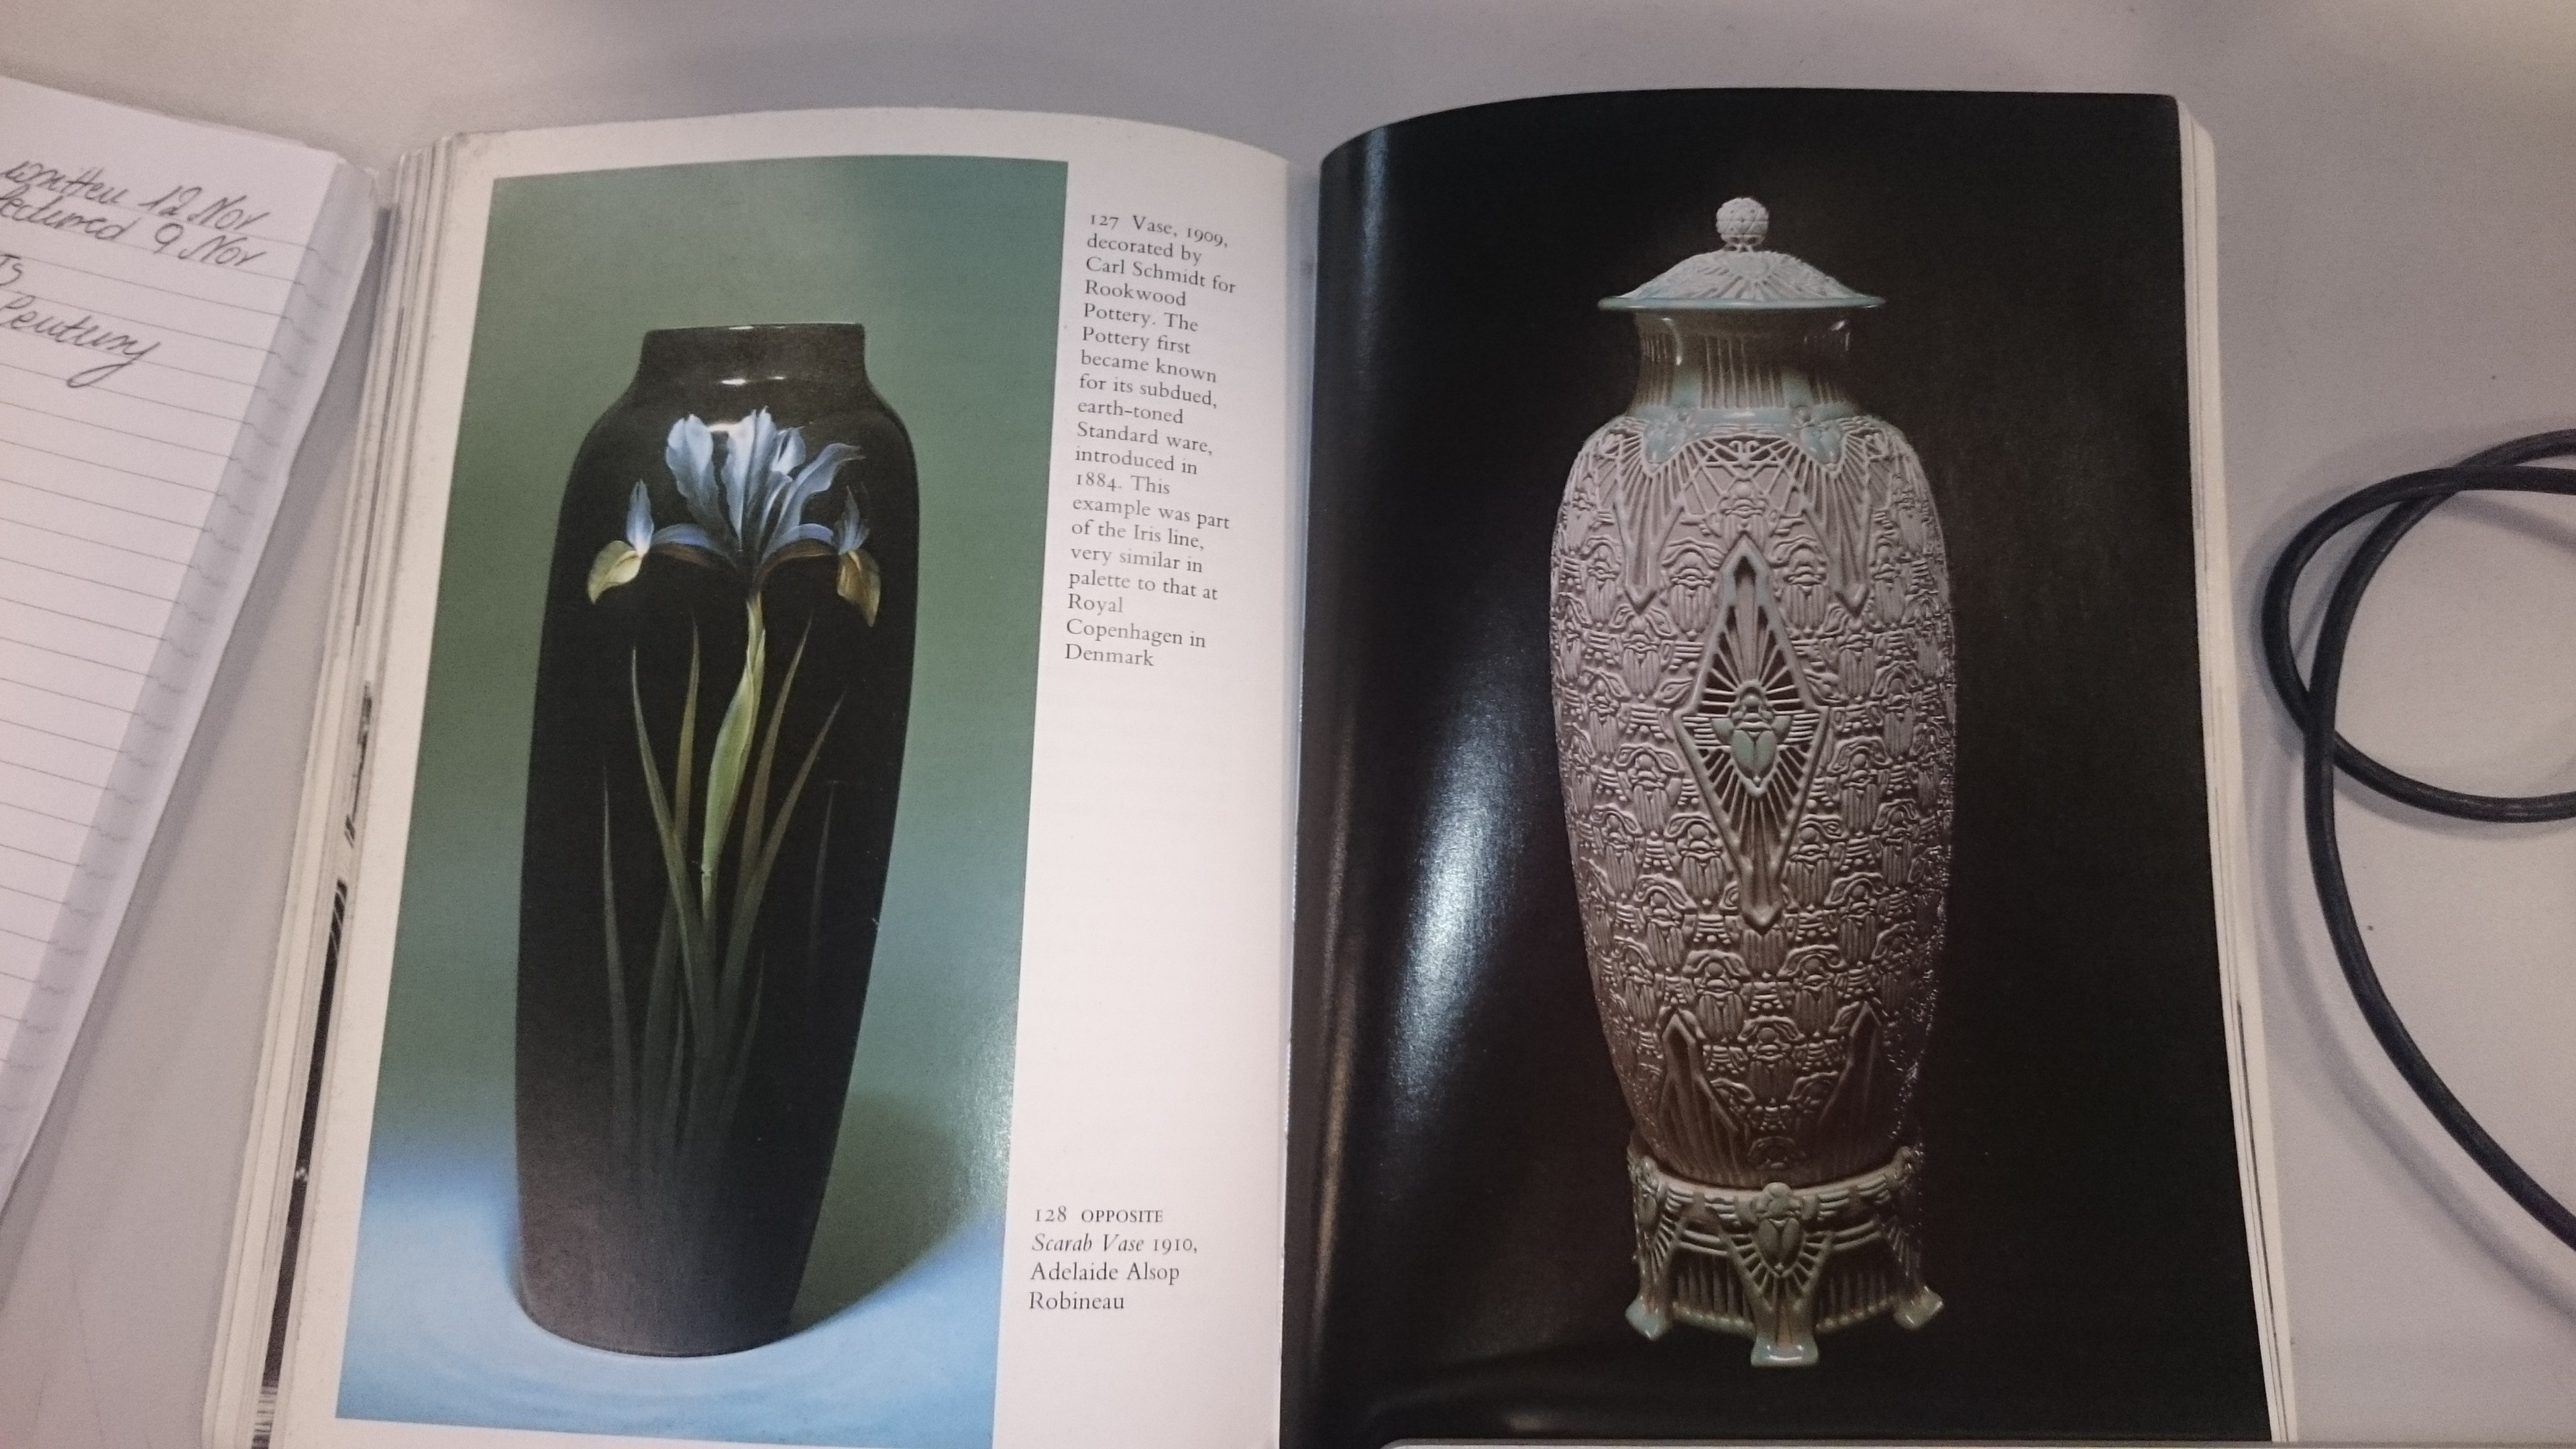 11 Ideal Antique Rookwood Pottery Vases 2024 free download antique rookwood pottery vases of graphicdesign kora kozlowska with regard to left vase 1909 decorated by carl schmidt for rookwood right scarab vase 1910 adelaide alsop robineau